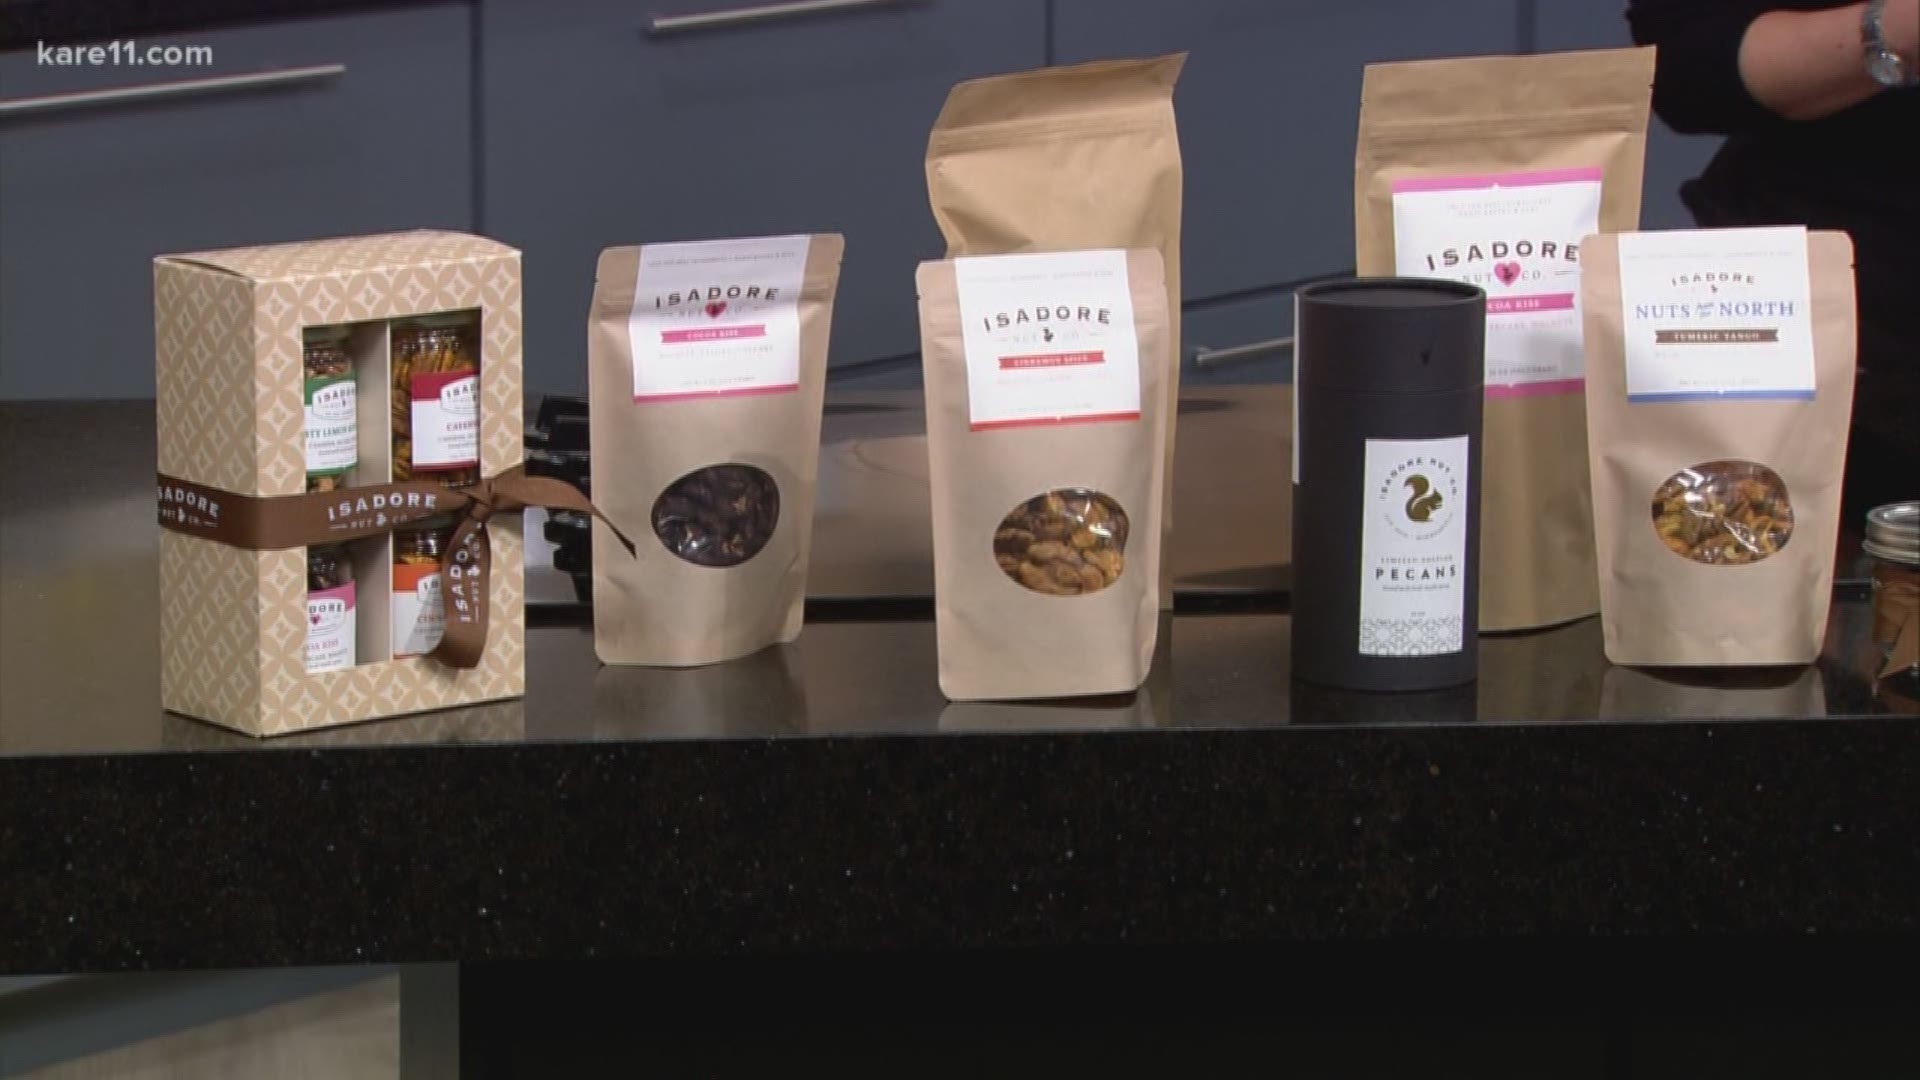 Tasya Kelen from Isadore Nut Company joined us to talk about important nutritional benefits of eating roasted, spiced nuts.